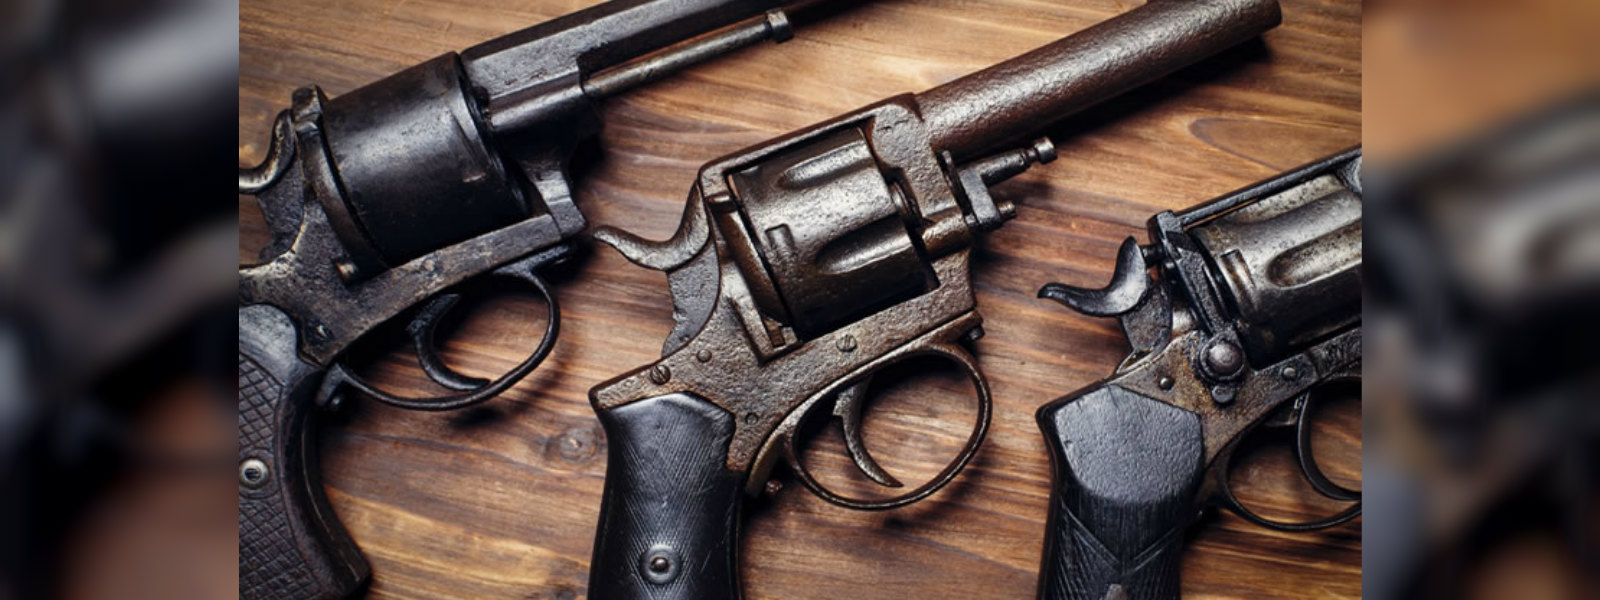 Three arrested with firearms in Matara